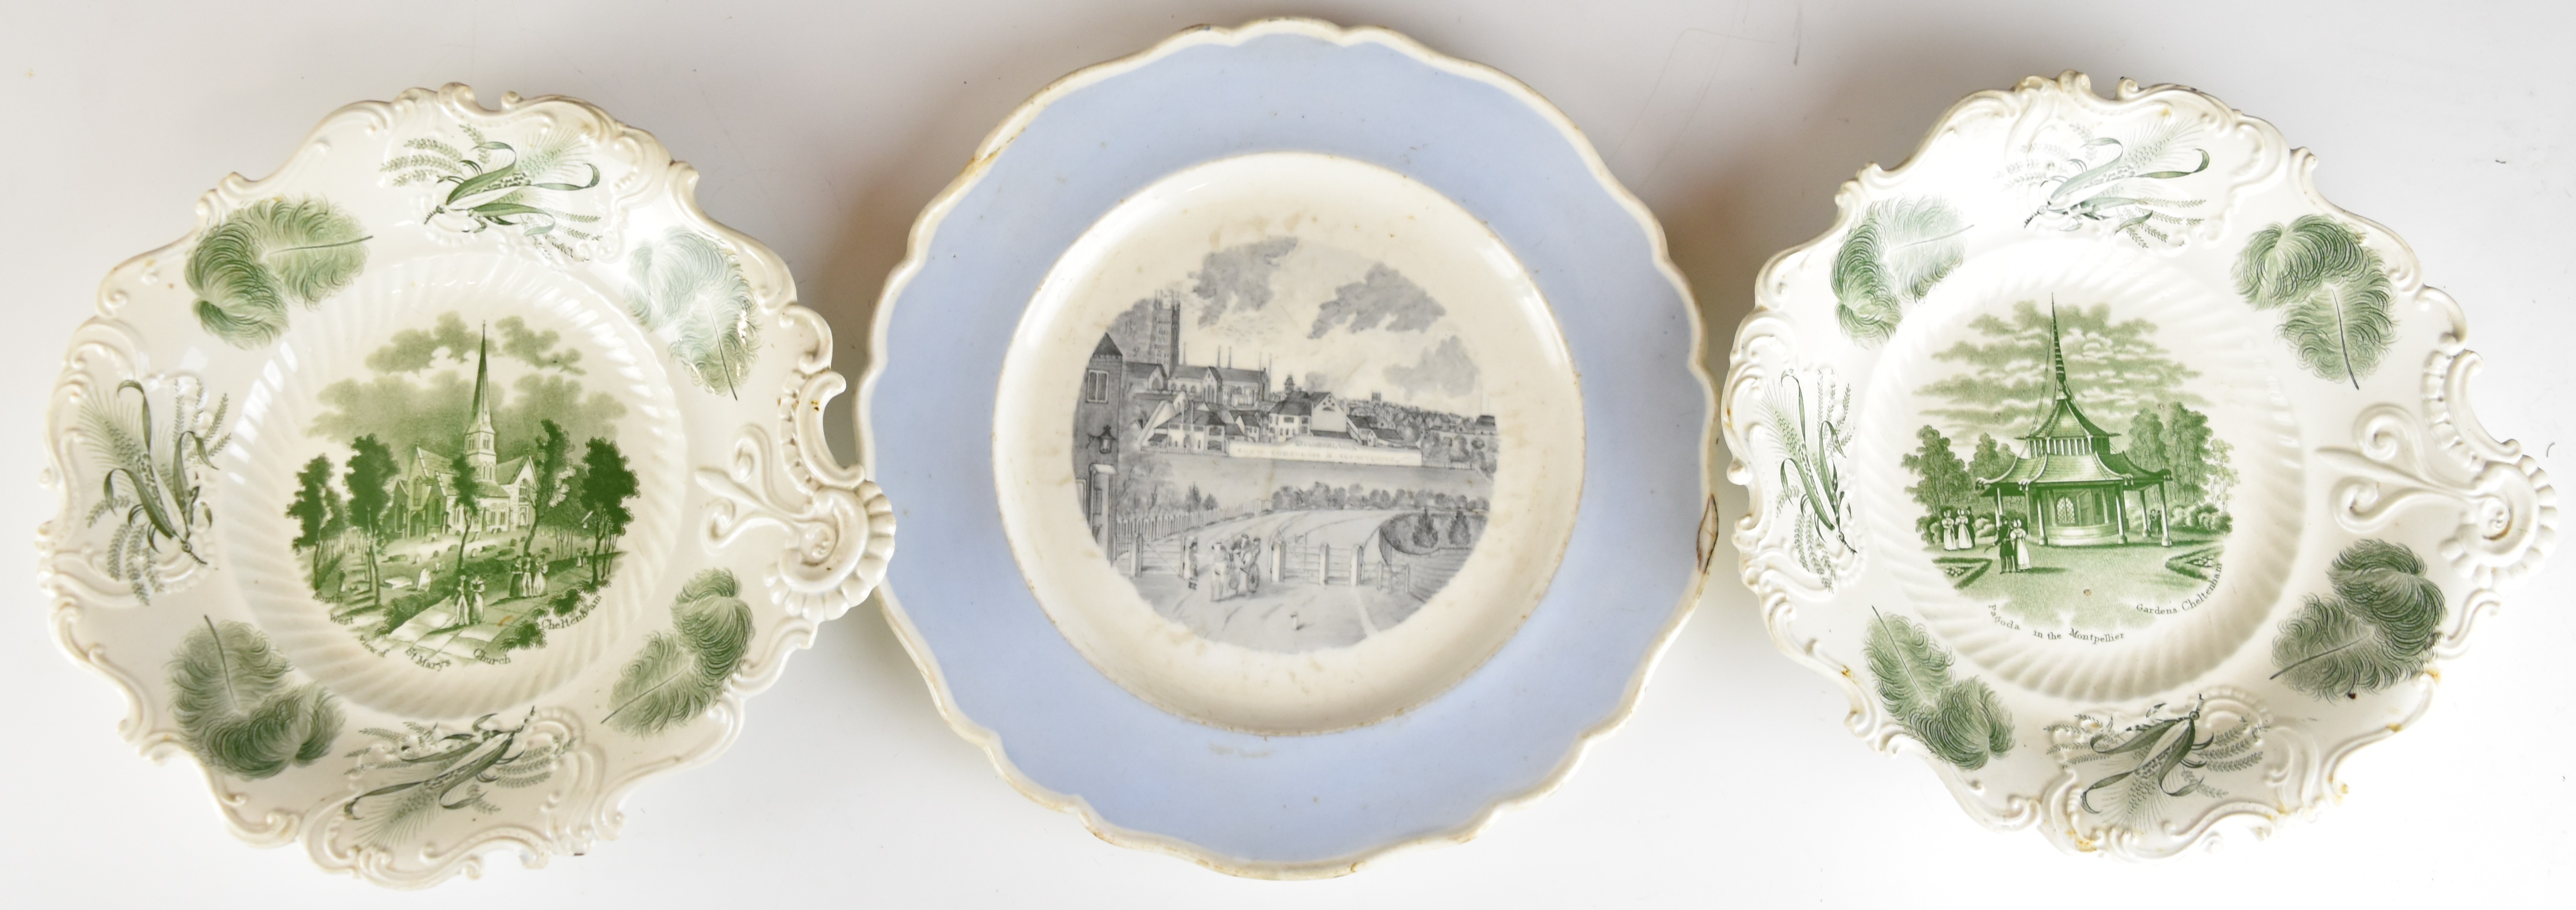 John Mortlock and Chamberlains Worcester plates and dishes with decoration of Montpellier